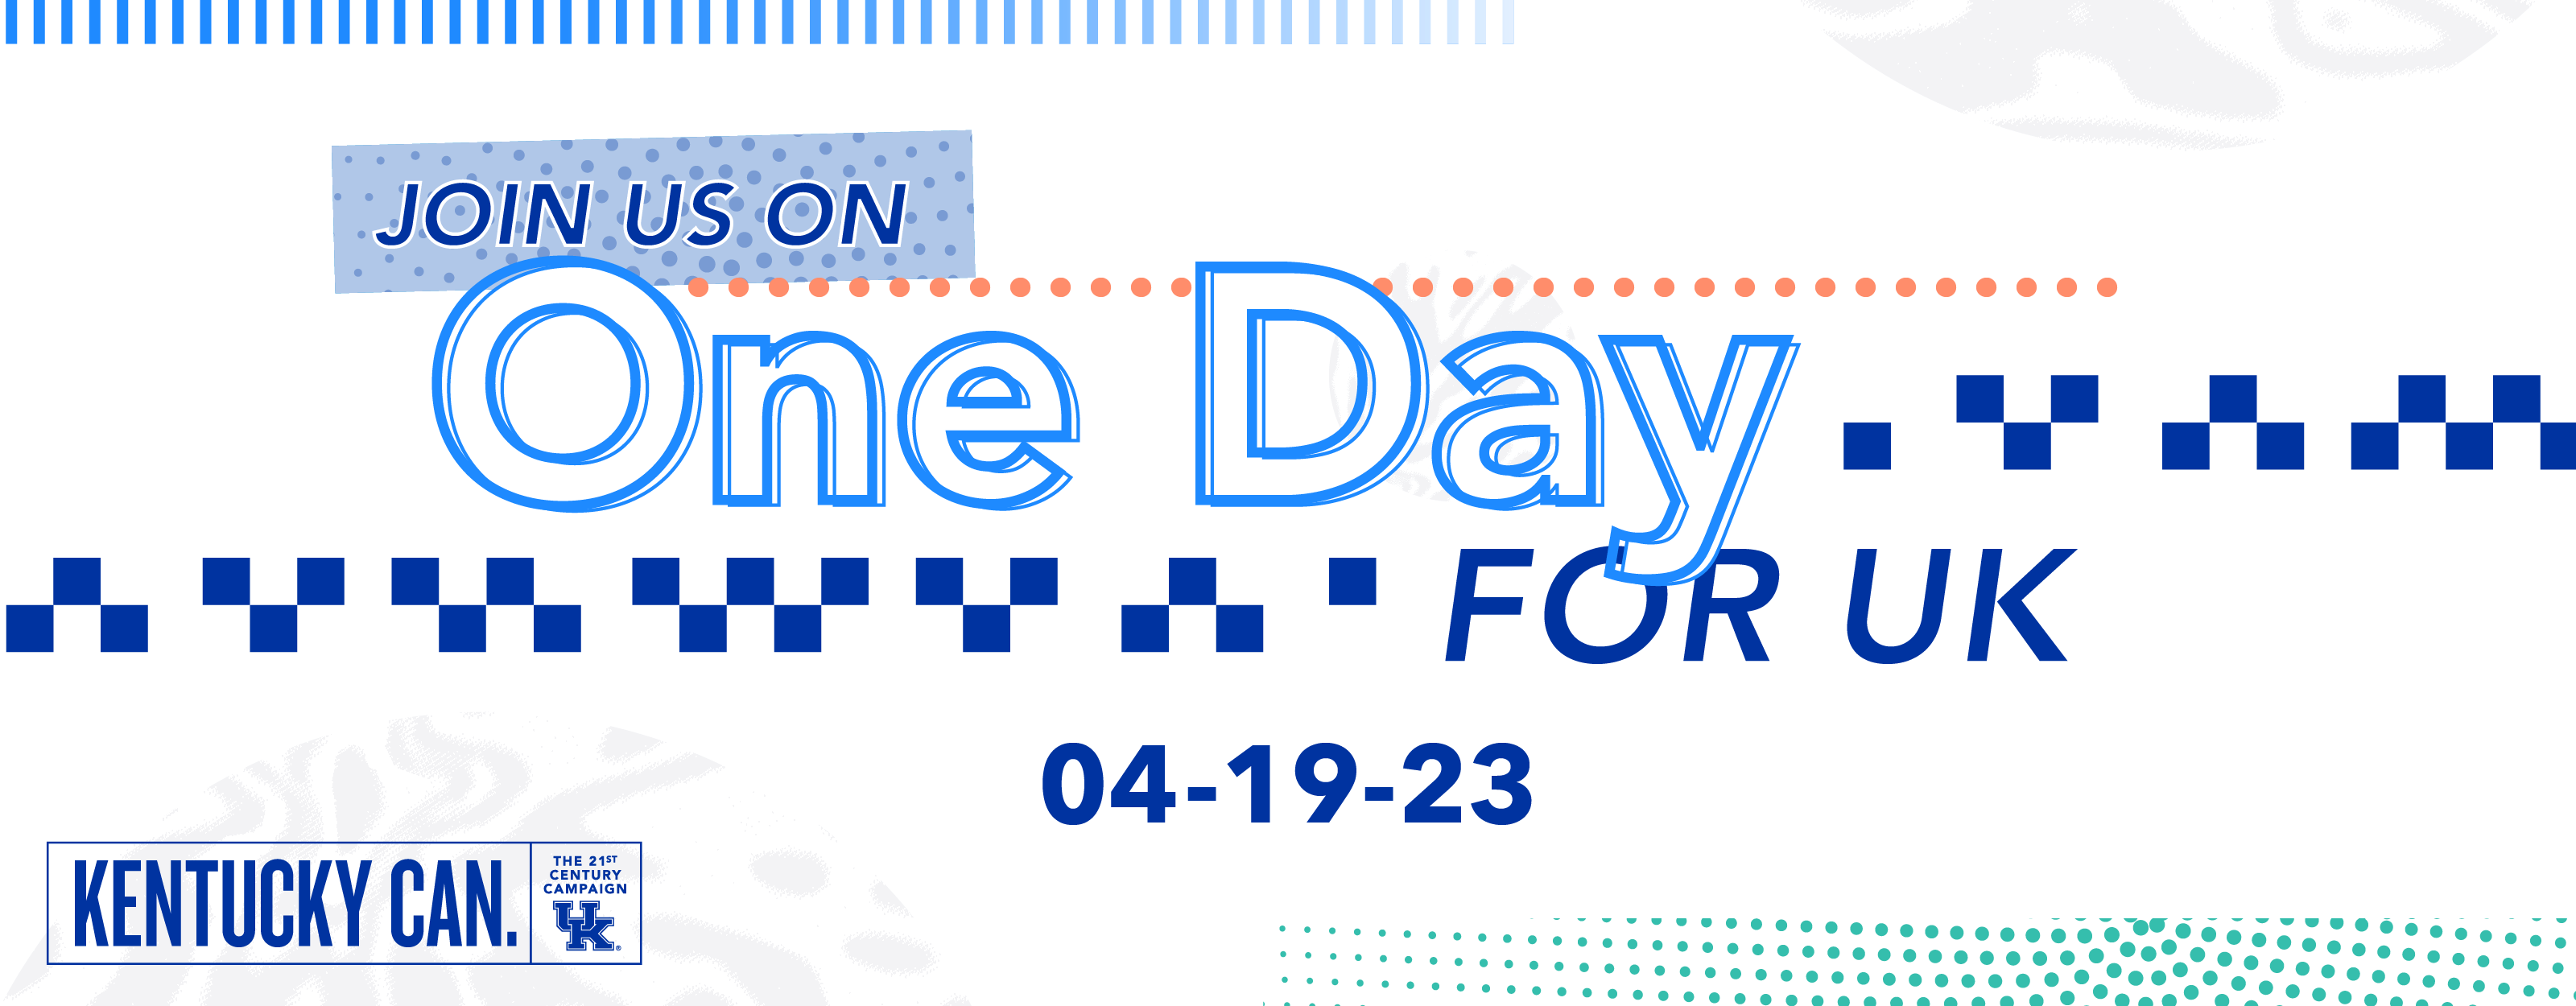 One Day for UK is April 19th!